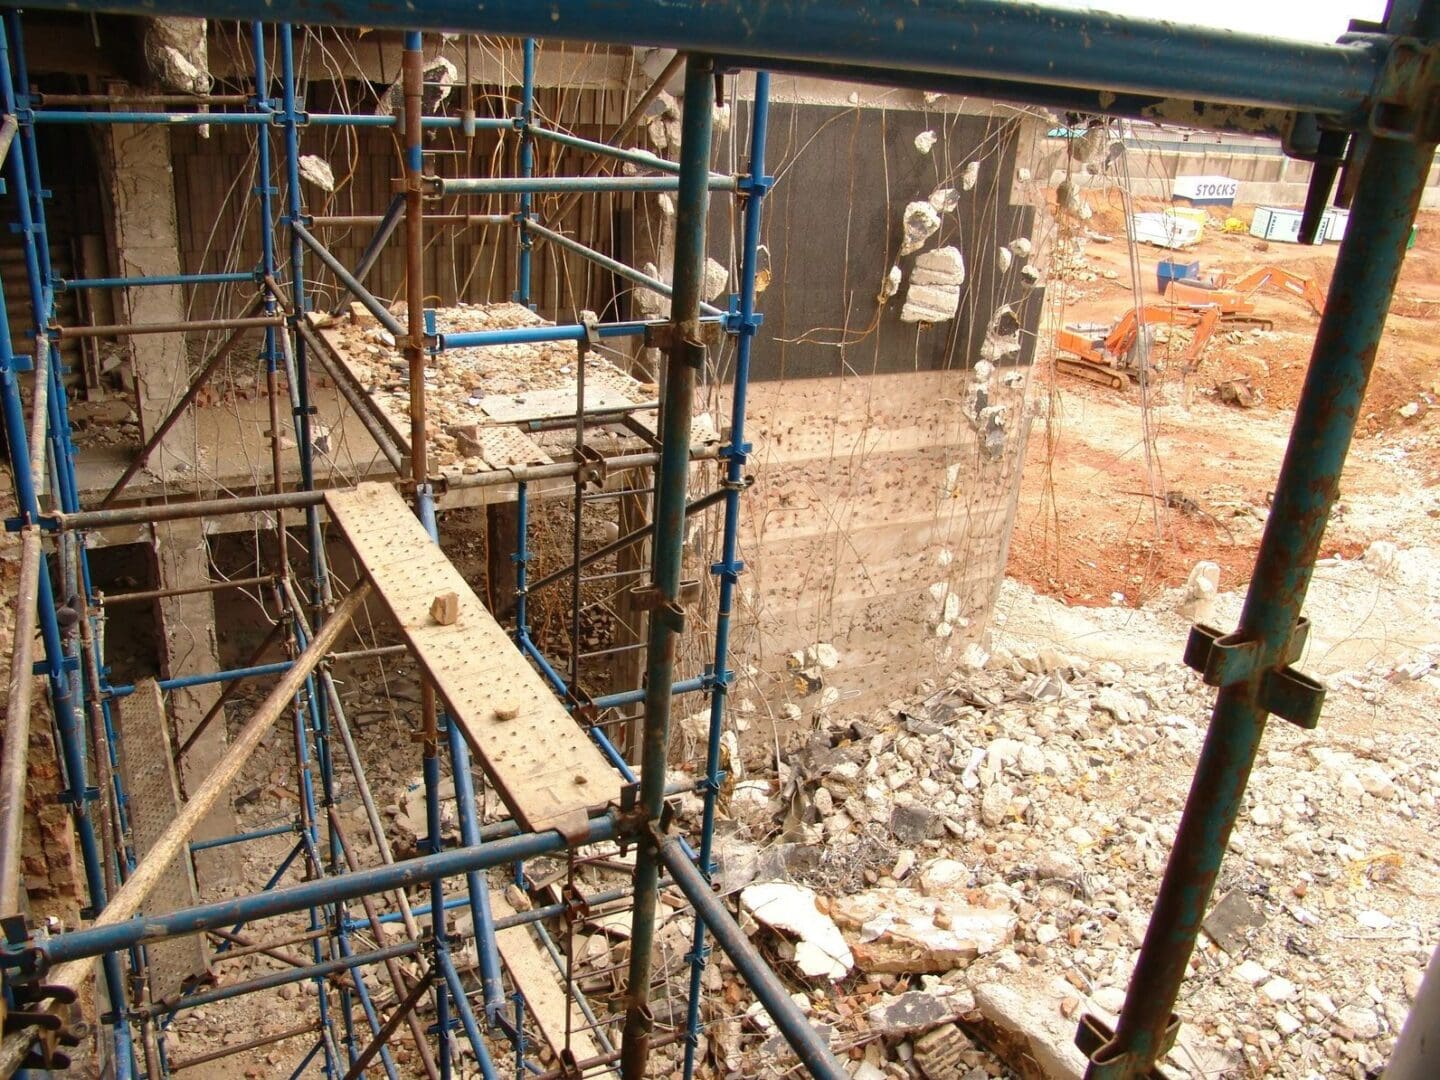 A building under construction with scaffolding and rubble.